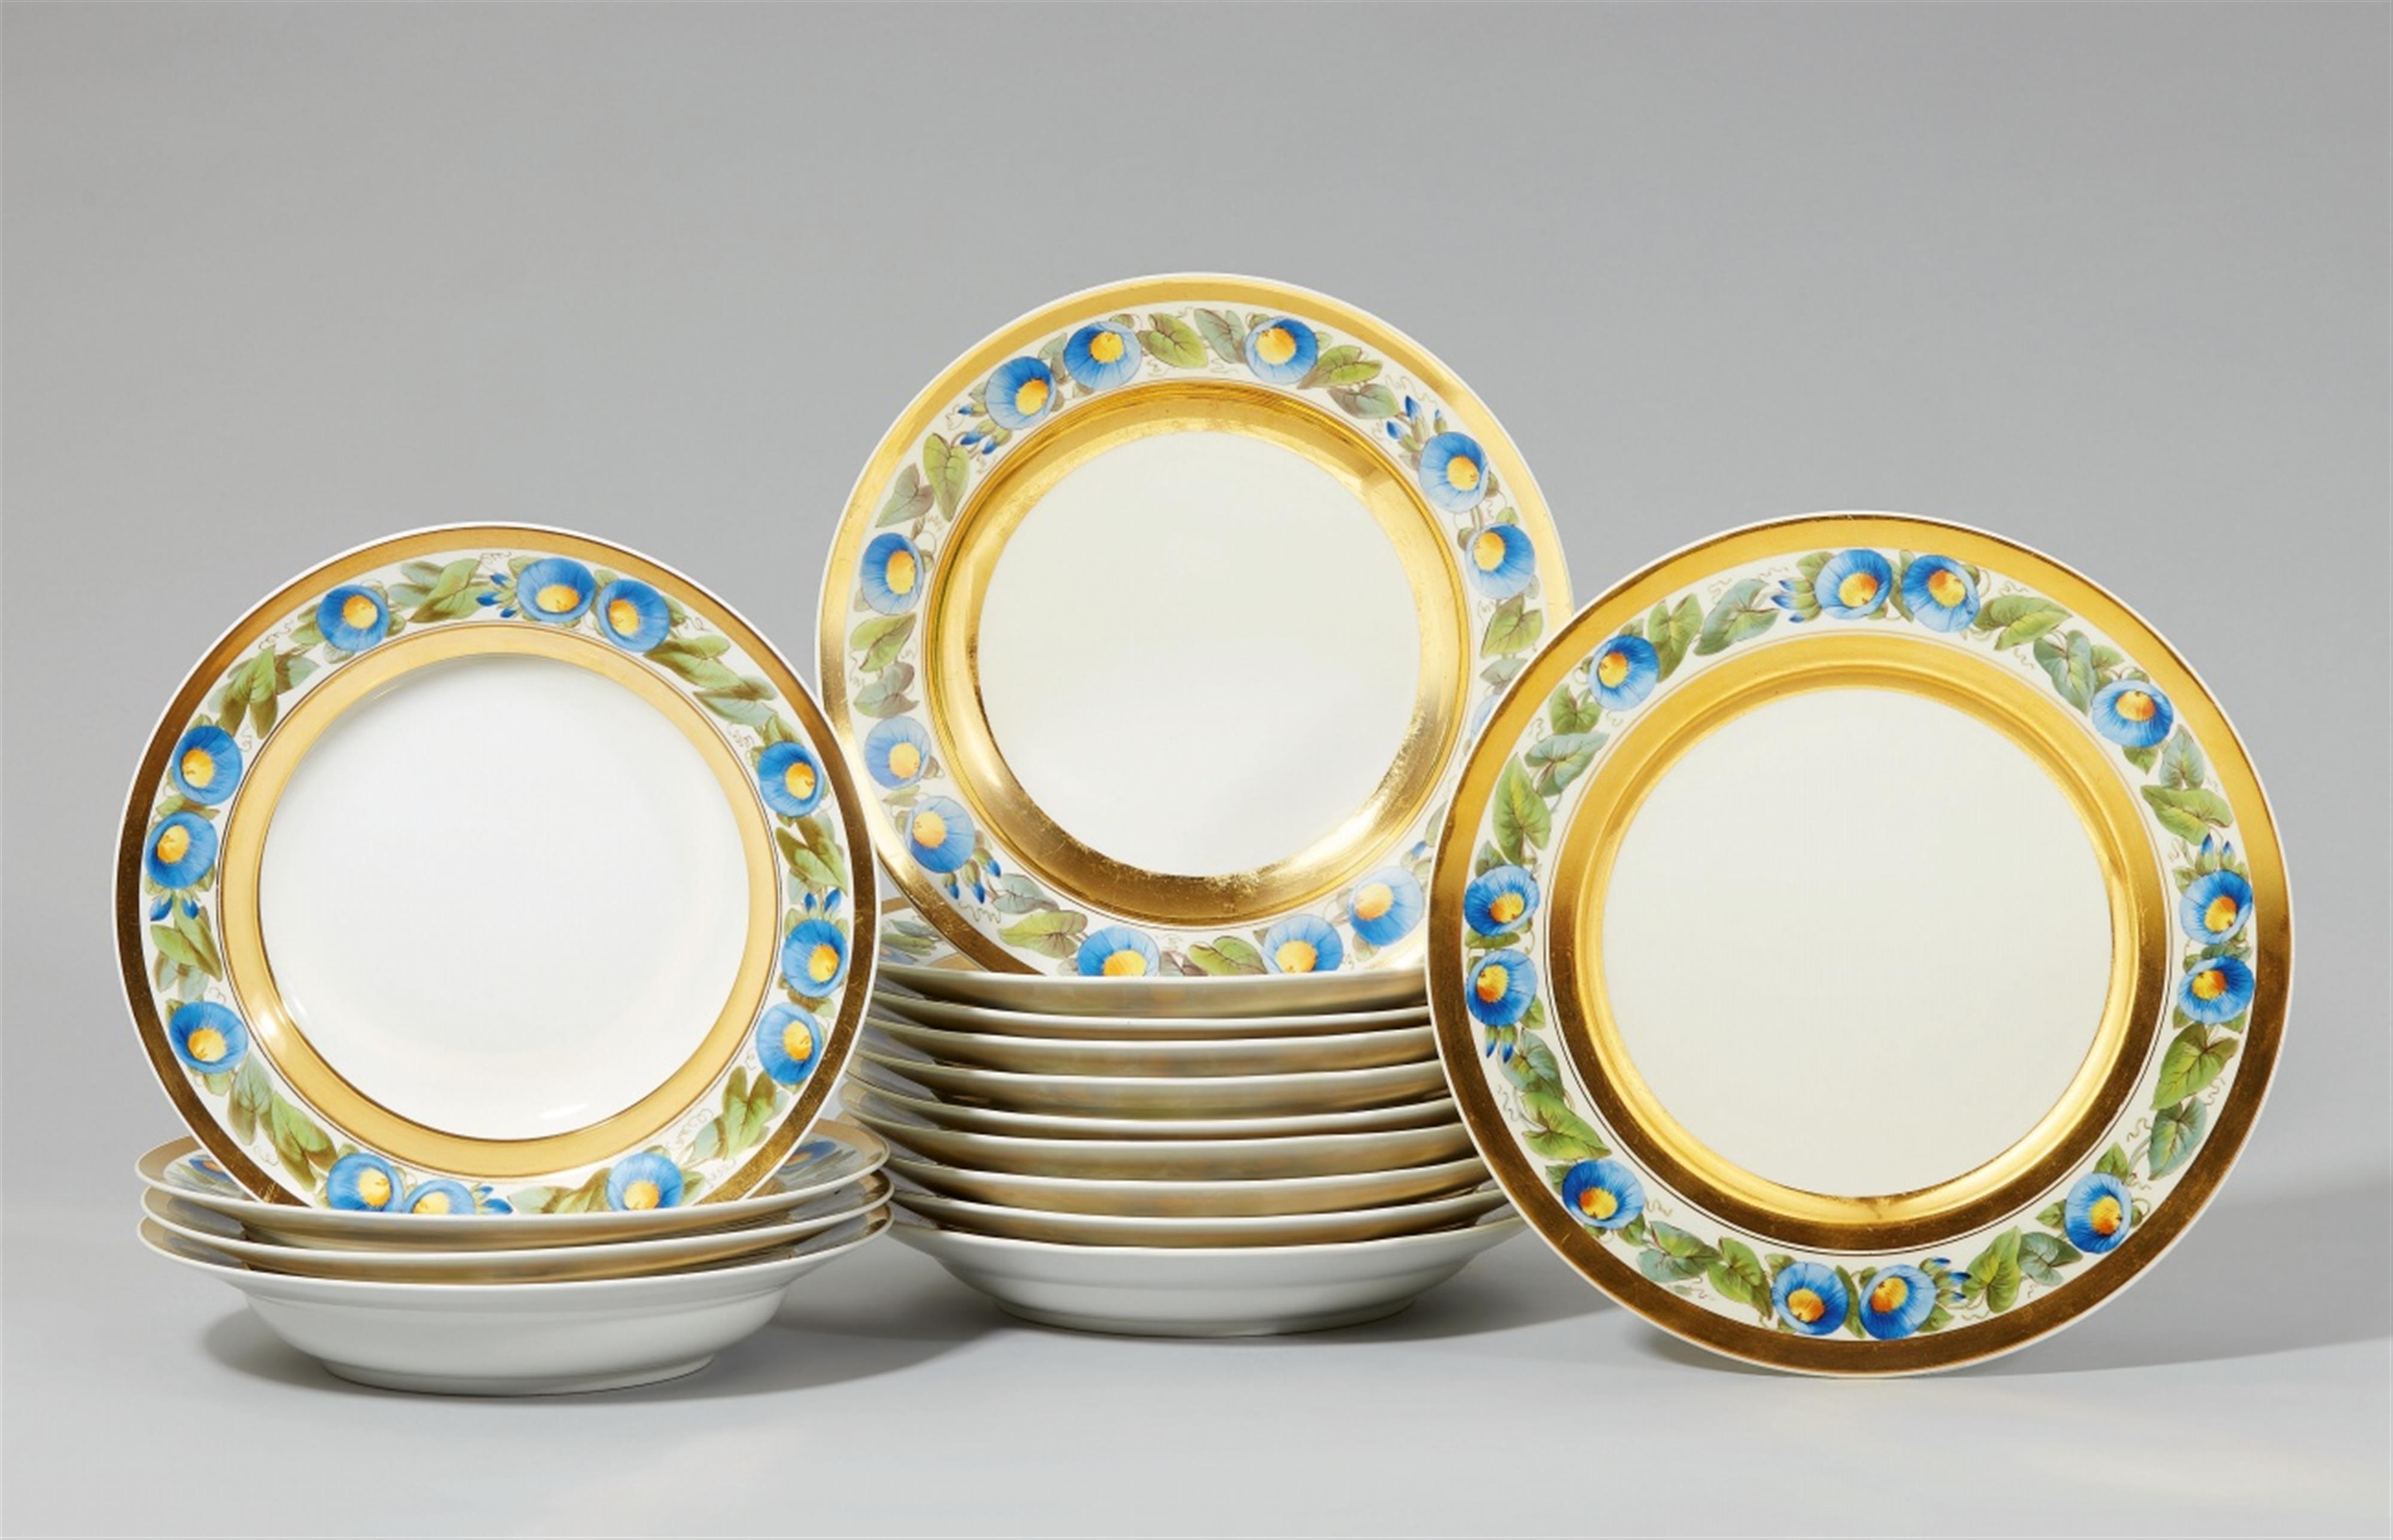 Ten Berlin KPM porcelain dinner plates and four soup bowls from the service with morning glories - image-1